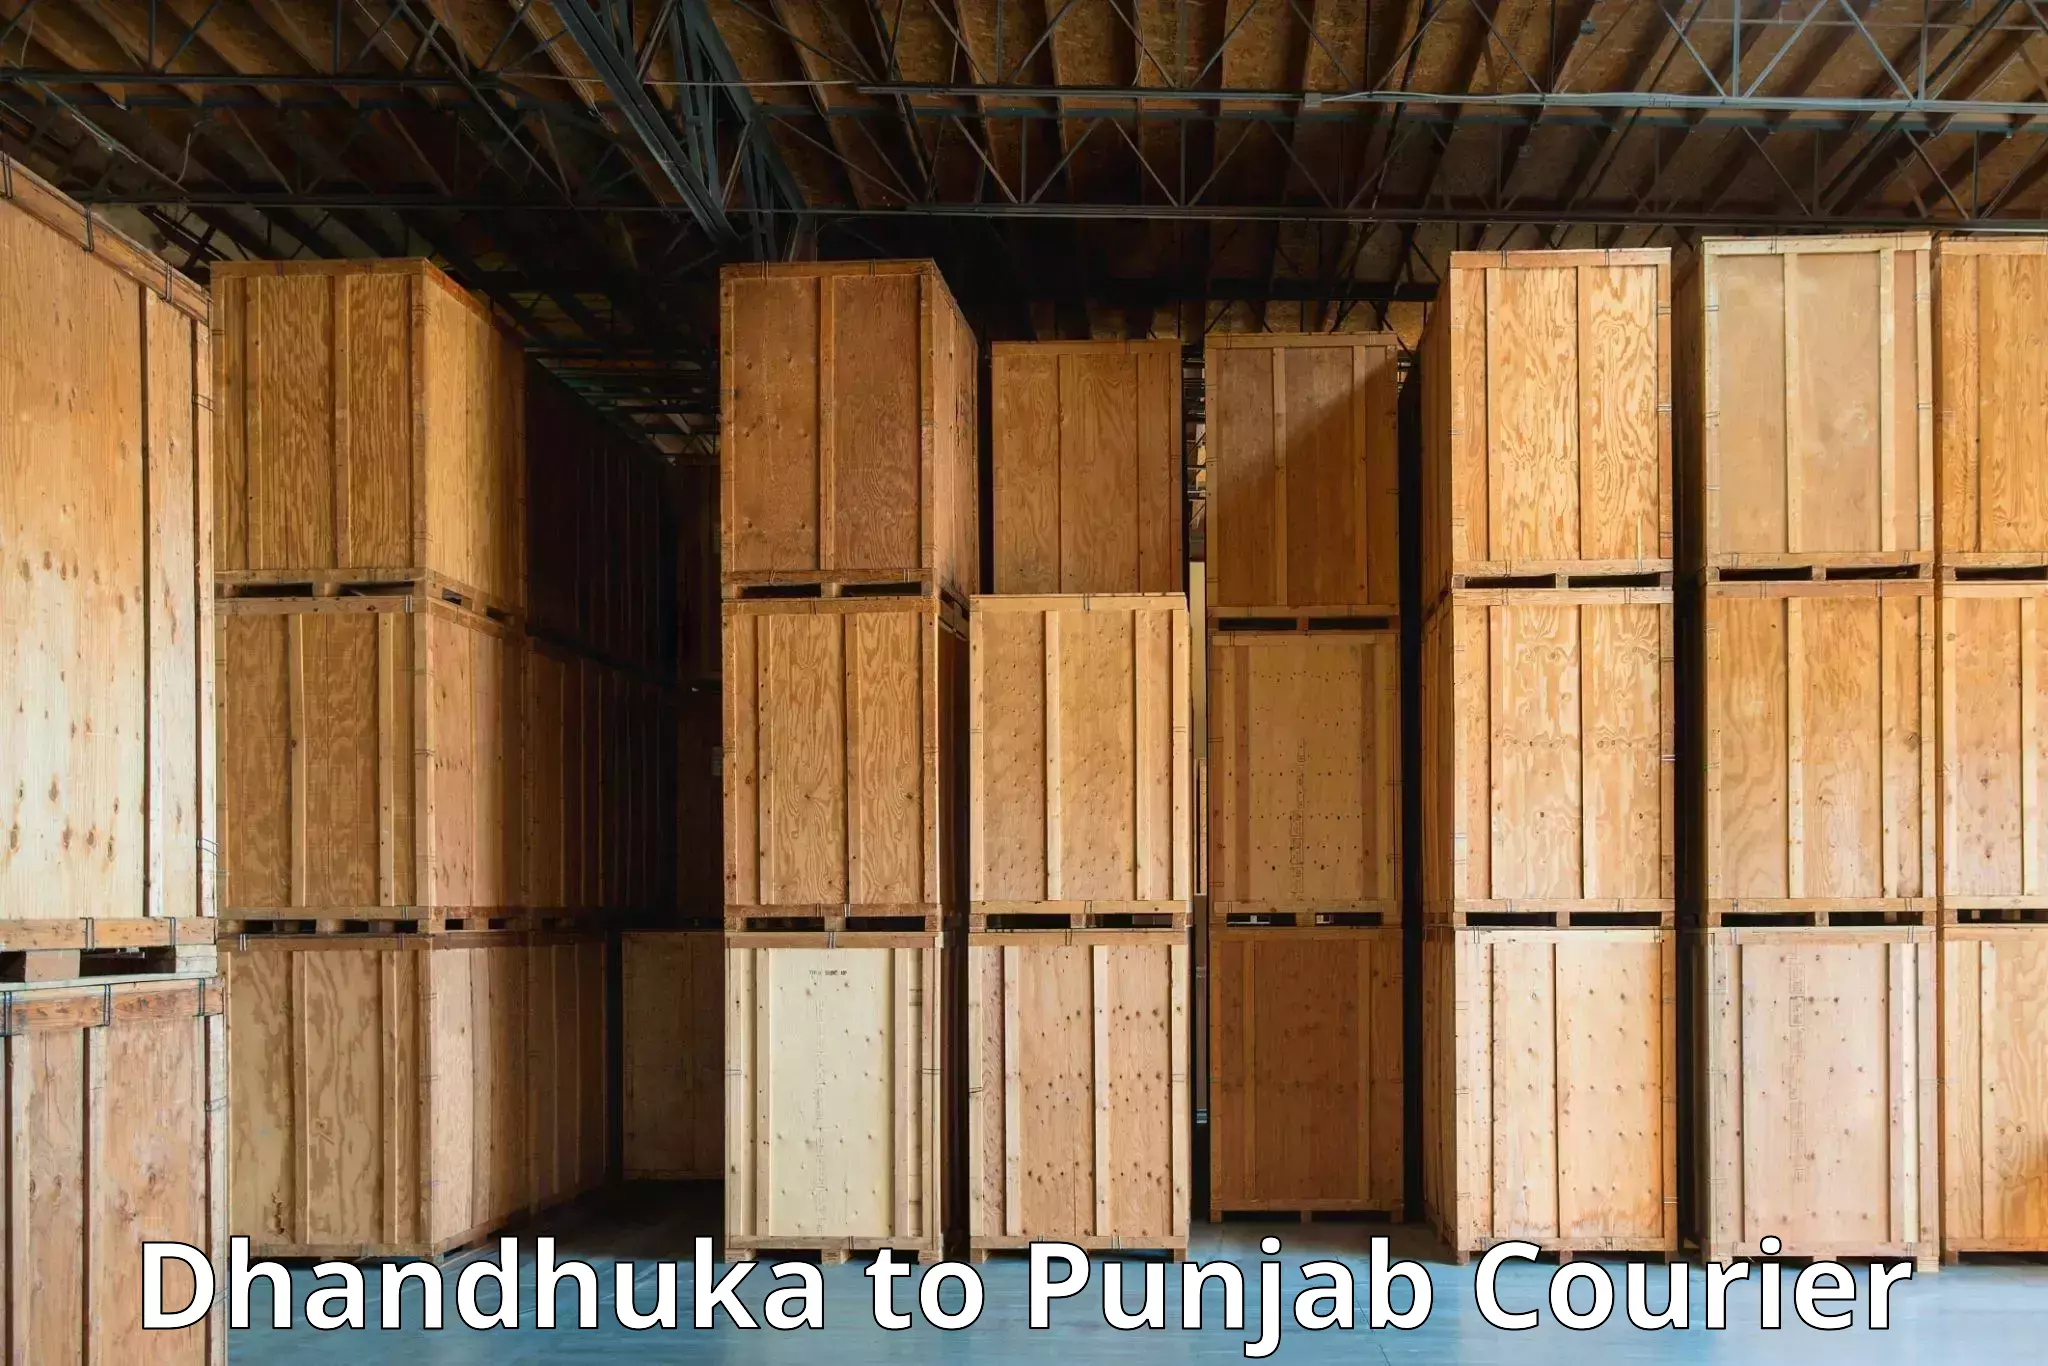 Courier service partnerships in Dhandhuka to Dera Bassi